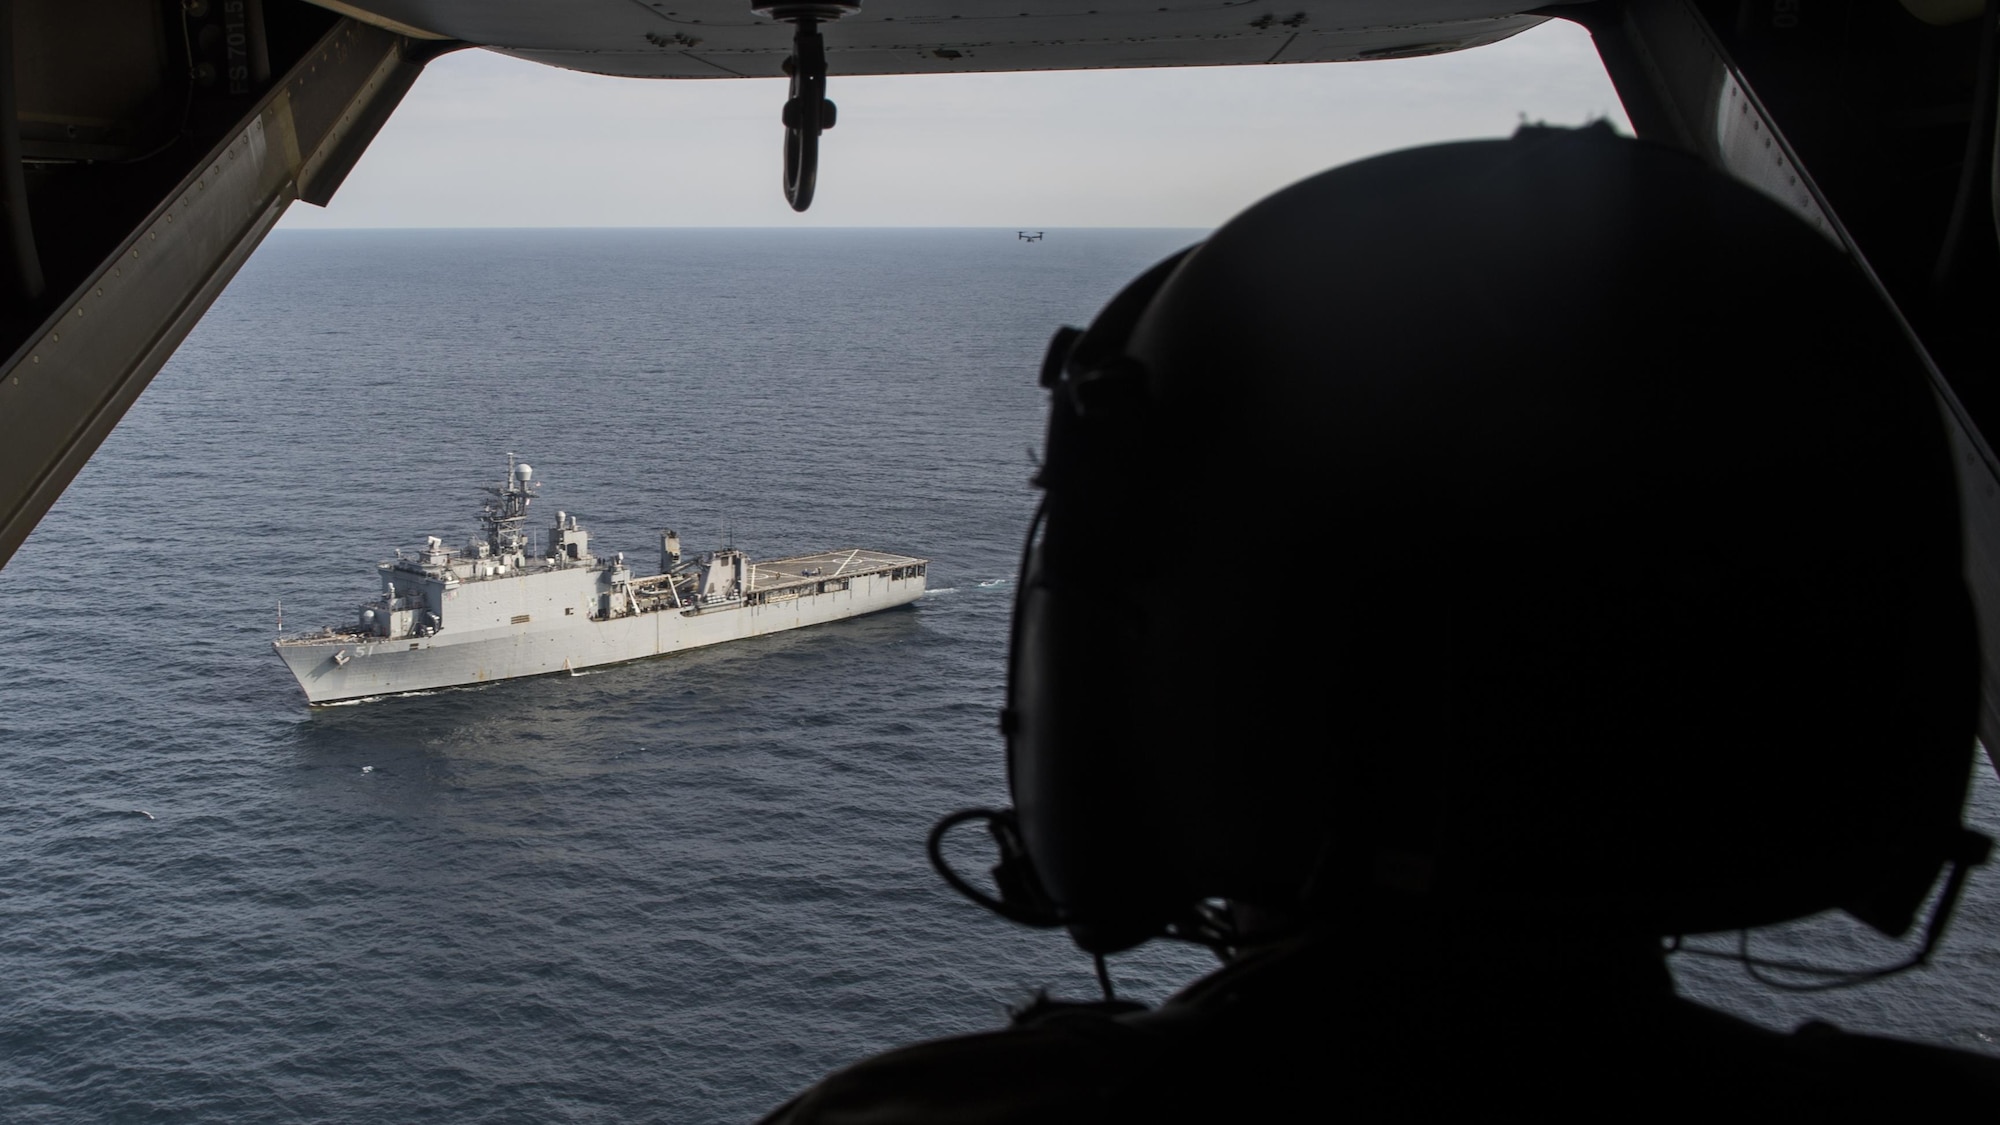 A flight engineer with the 8th Special Operations Squadron looks on as a CV-22 Osprey tiltrotor aircraft departs the amphibious dock landing ship USS Oak Hill (LSD 51) during a deck landing qualification flight off the coast of Virginia, July 25, 2017. Deck landing capabilities allow 8th SOS aircrew to expand the Osprey’s global reach. (U.S. Air Force photo by Airman 1st Class Joseph Pick)